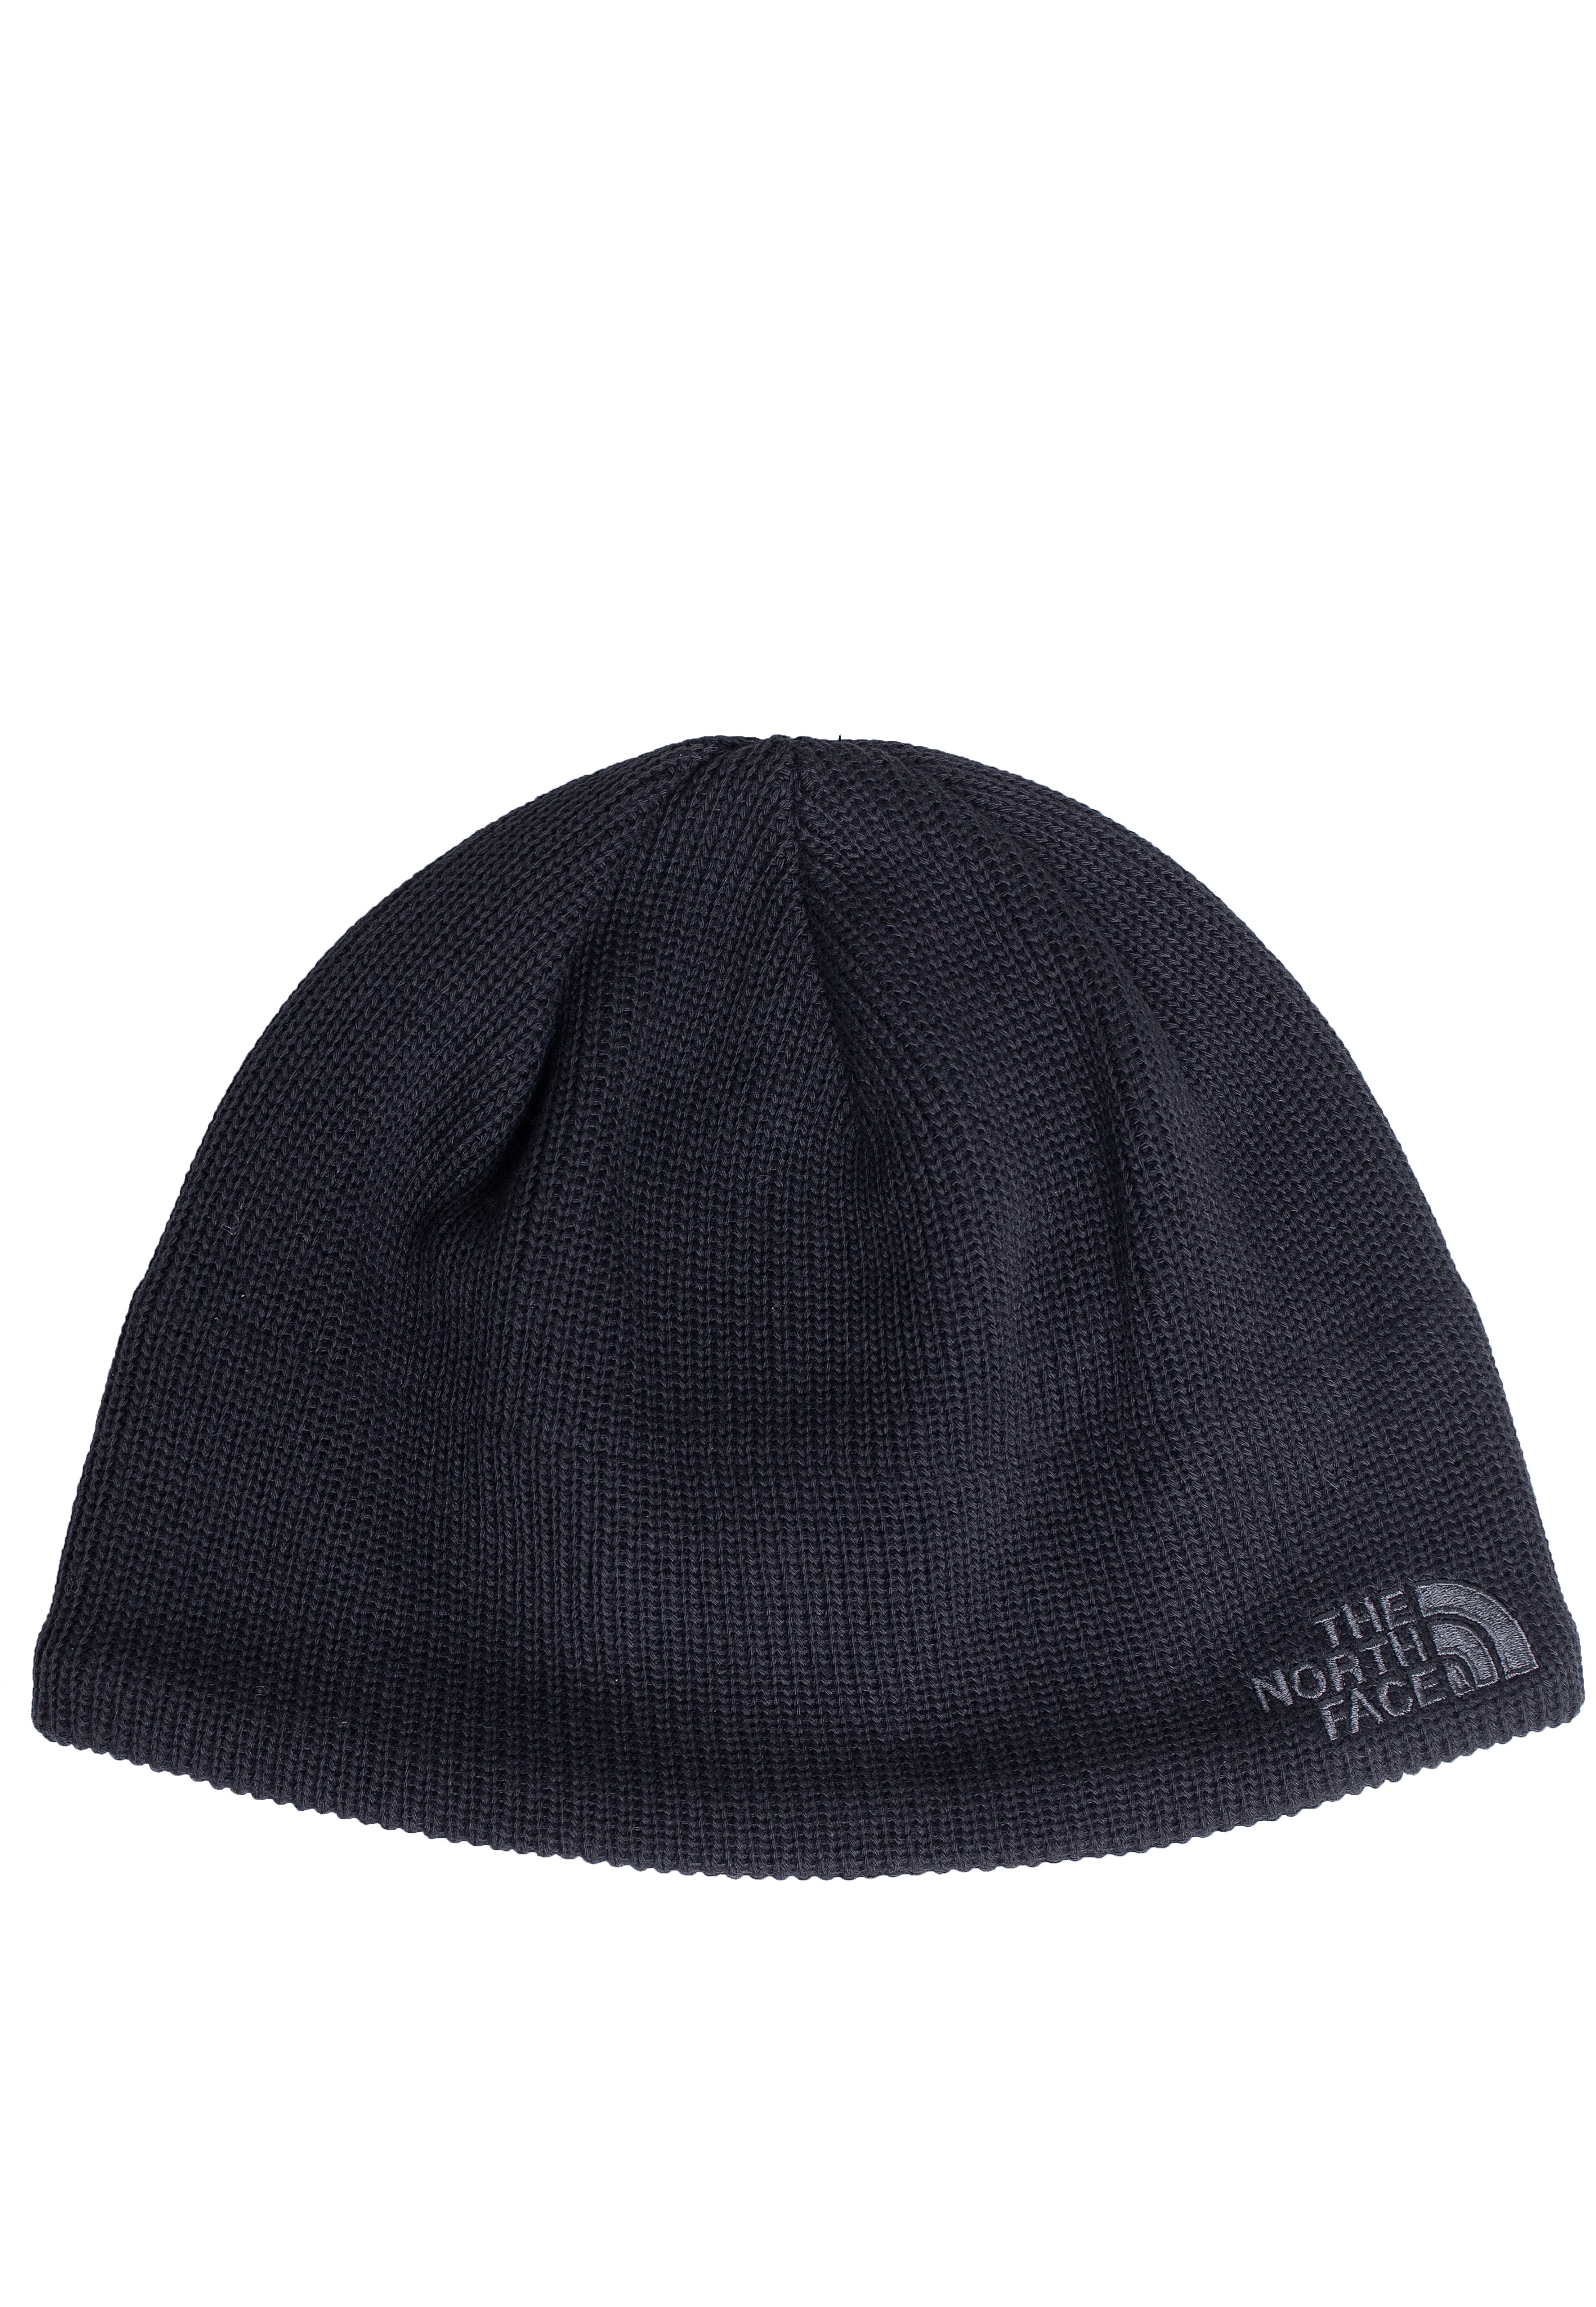 The North Face - Bones Recycled Black - Beanies